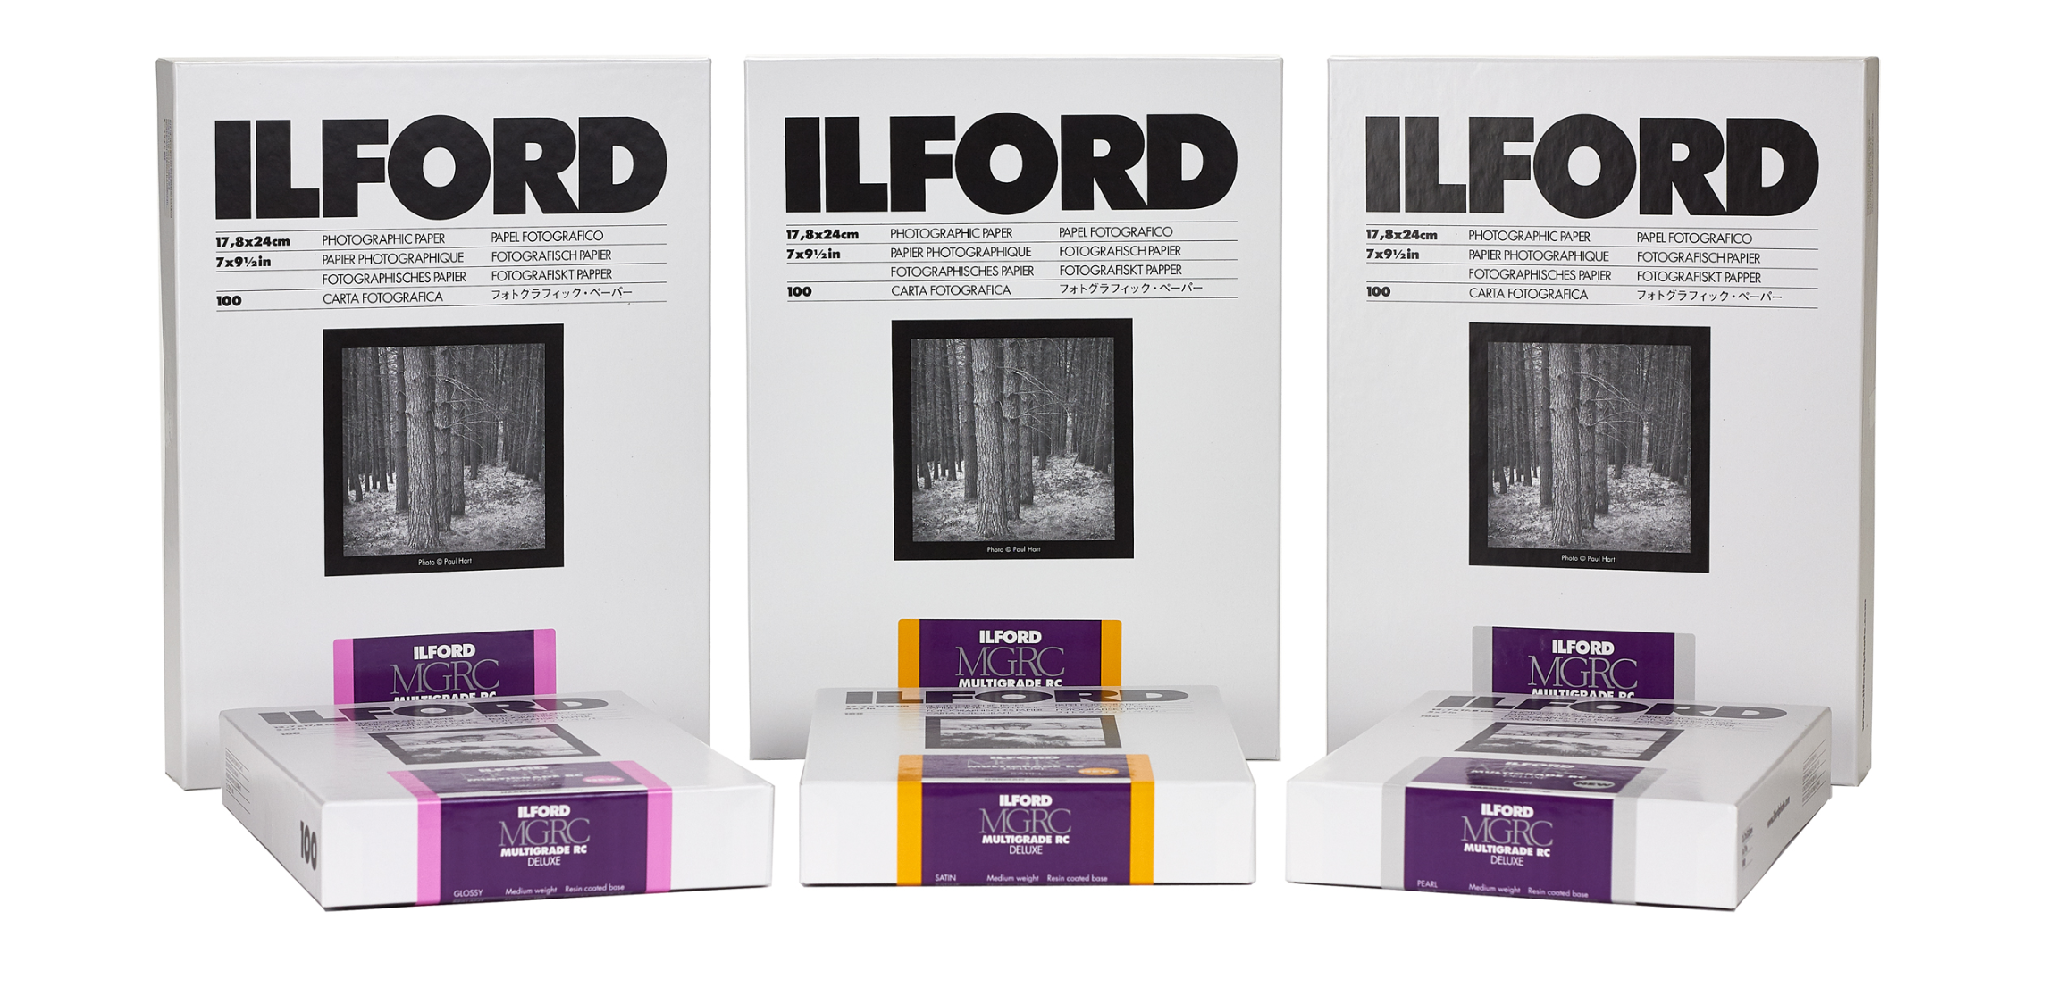 ilford-film00001.png